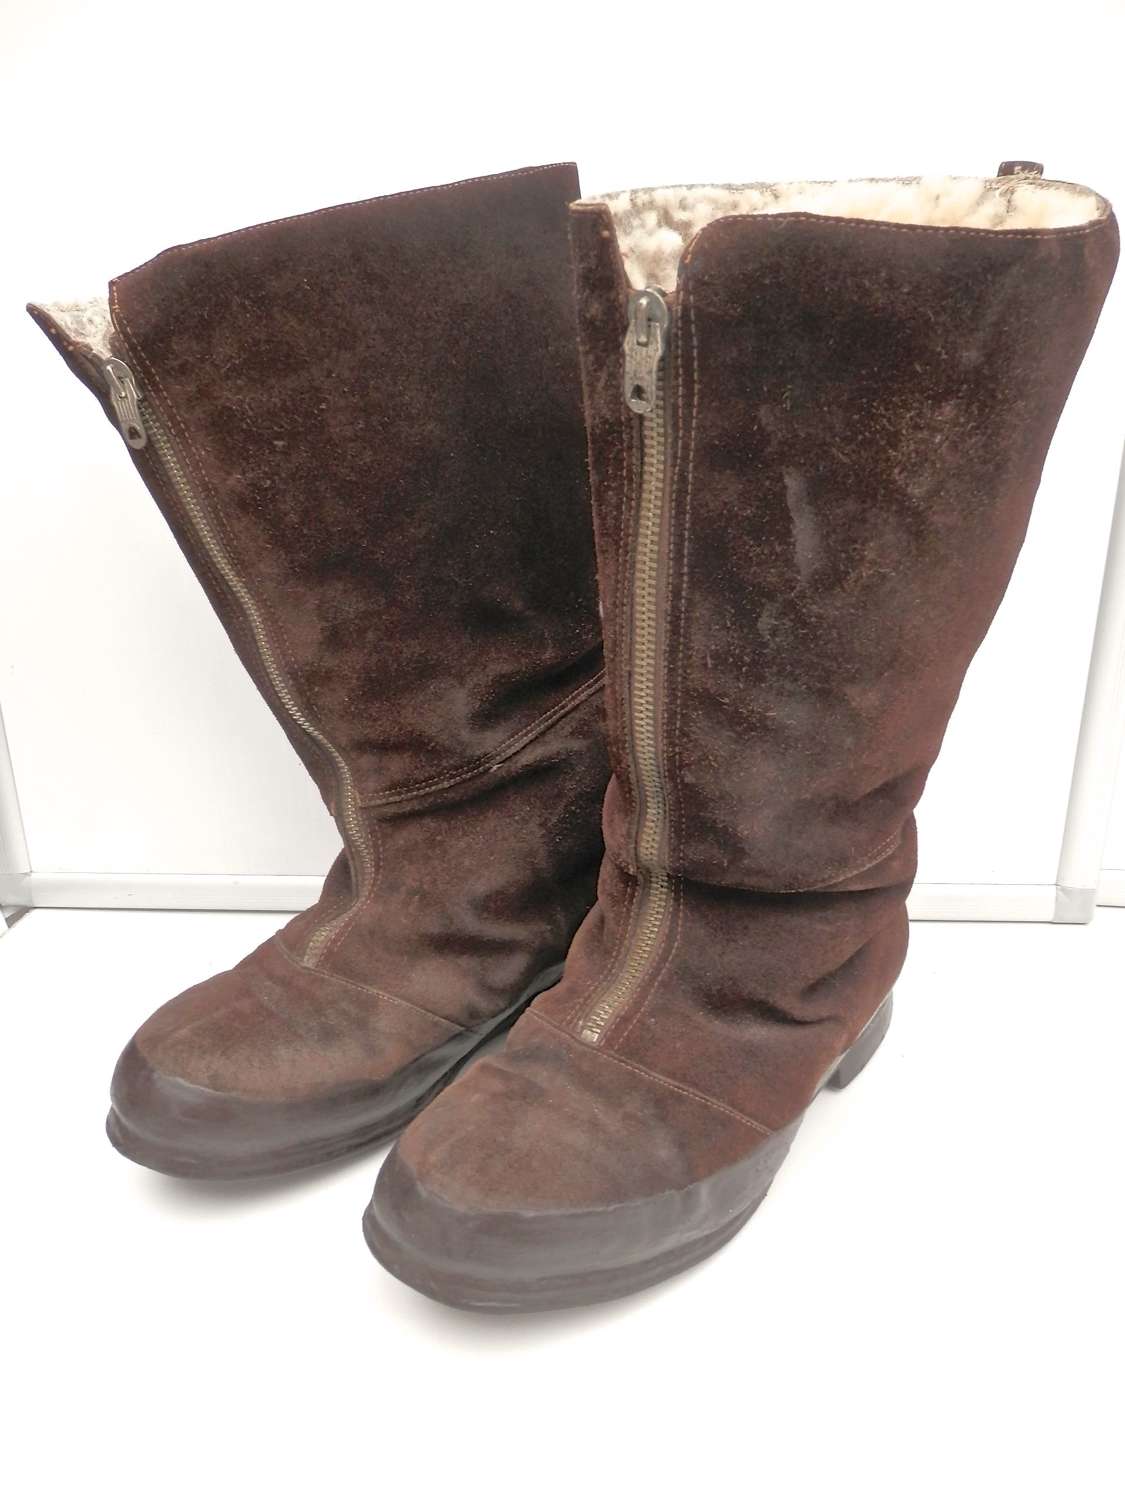 RAF 1940 pattern flying boots